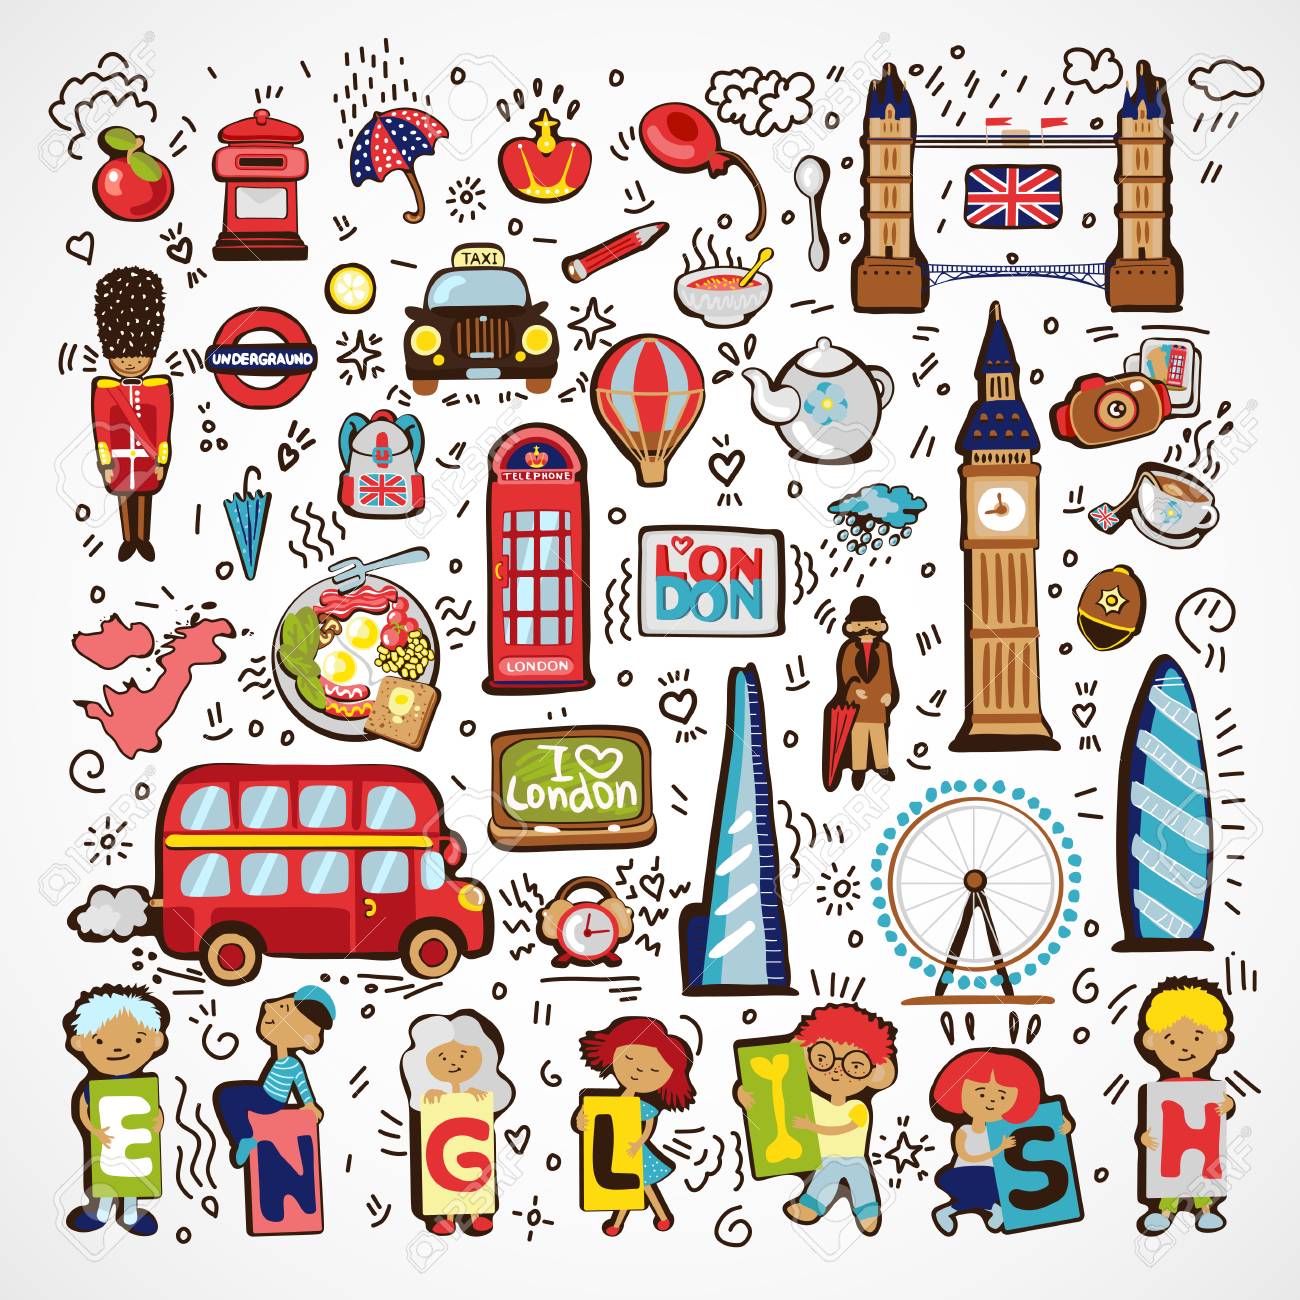 Vector London landmark, symbols. Hand drawn England doodle. Famous architectural monuments, sign, symbols, icons. England educational and travel elements, icon - english bus, taxi, architectural illustrations, post box and other English elements isolated on white elements